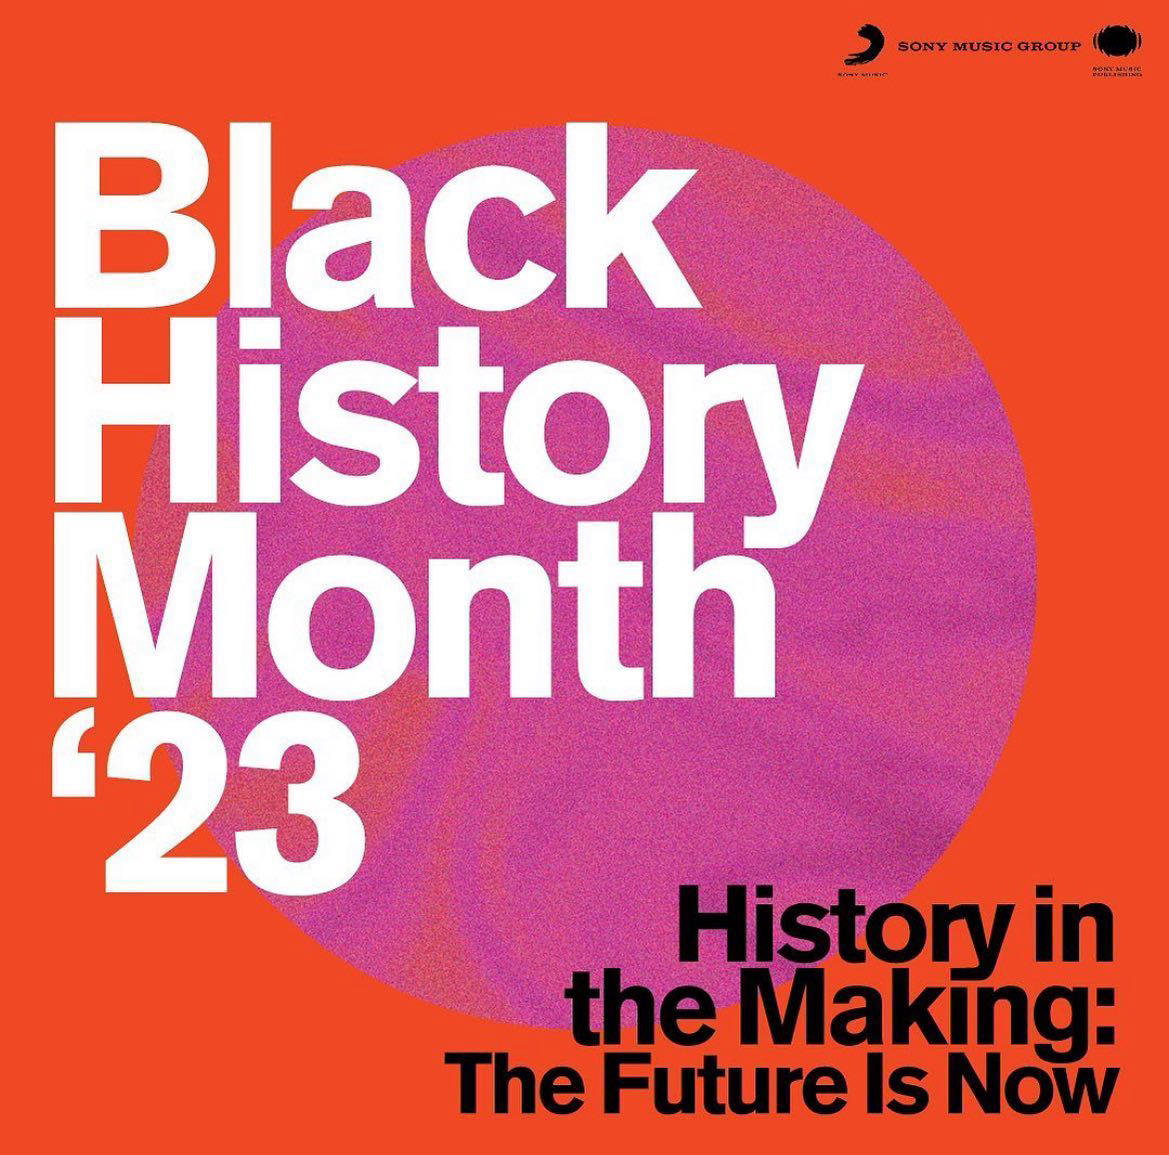 This Black History Month, Sony Music Group is embracing the theme “History in the Making